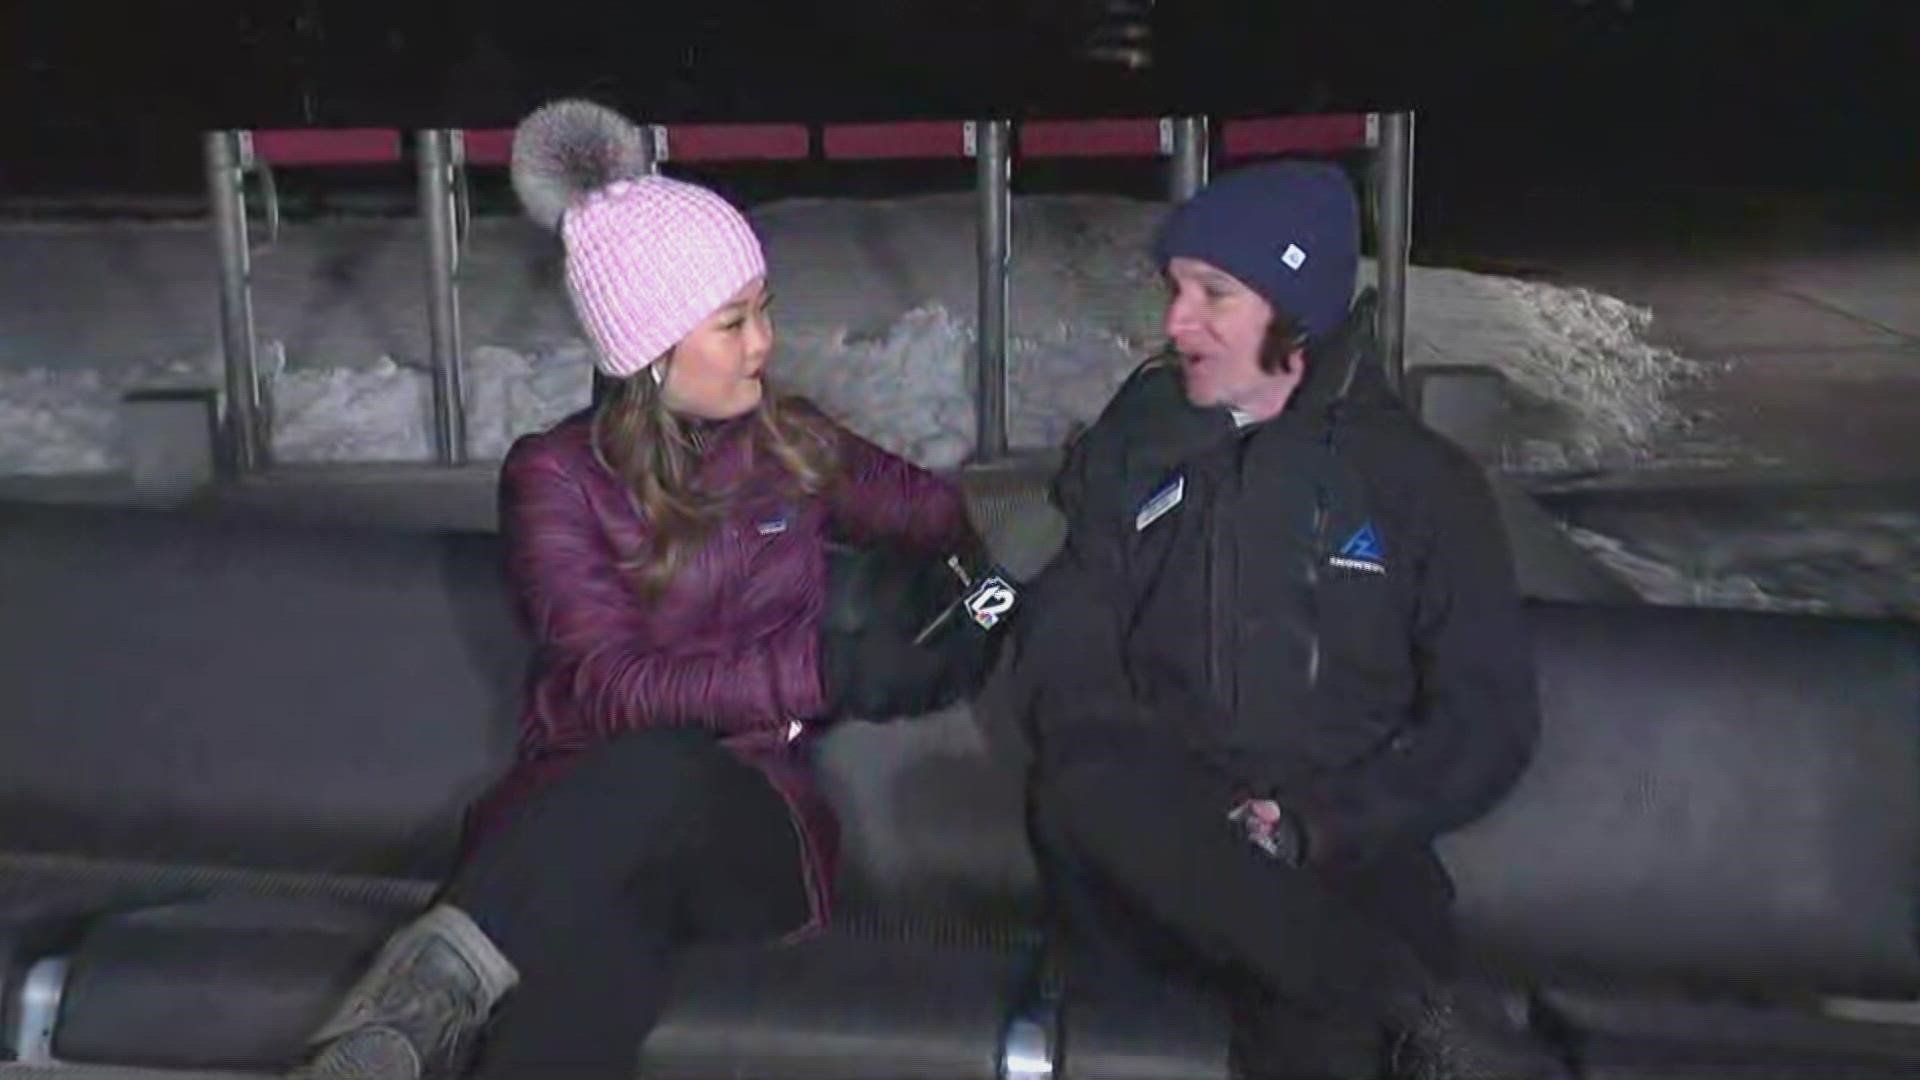 Arizona Snowbowl is opening up for skiing this week and Stella Sun is in Flagstaff giving us a rundown of all of the festivities.